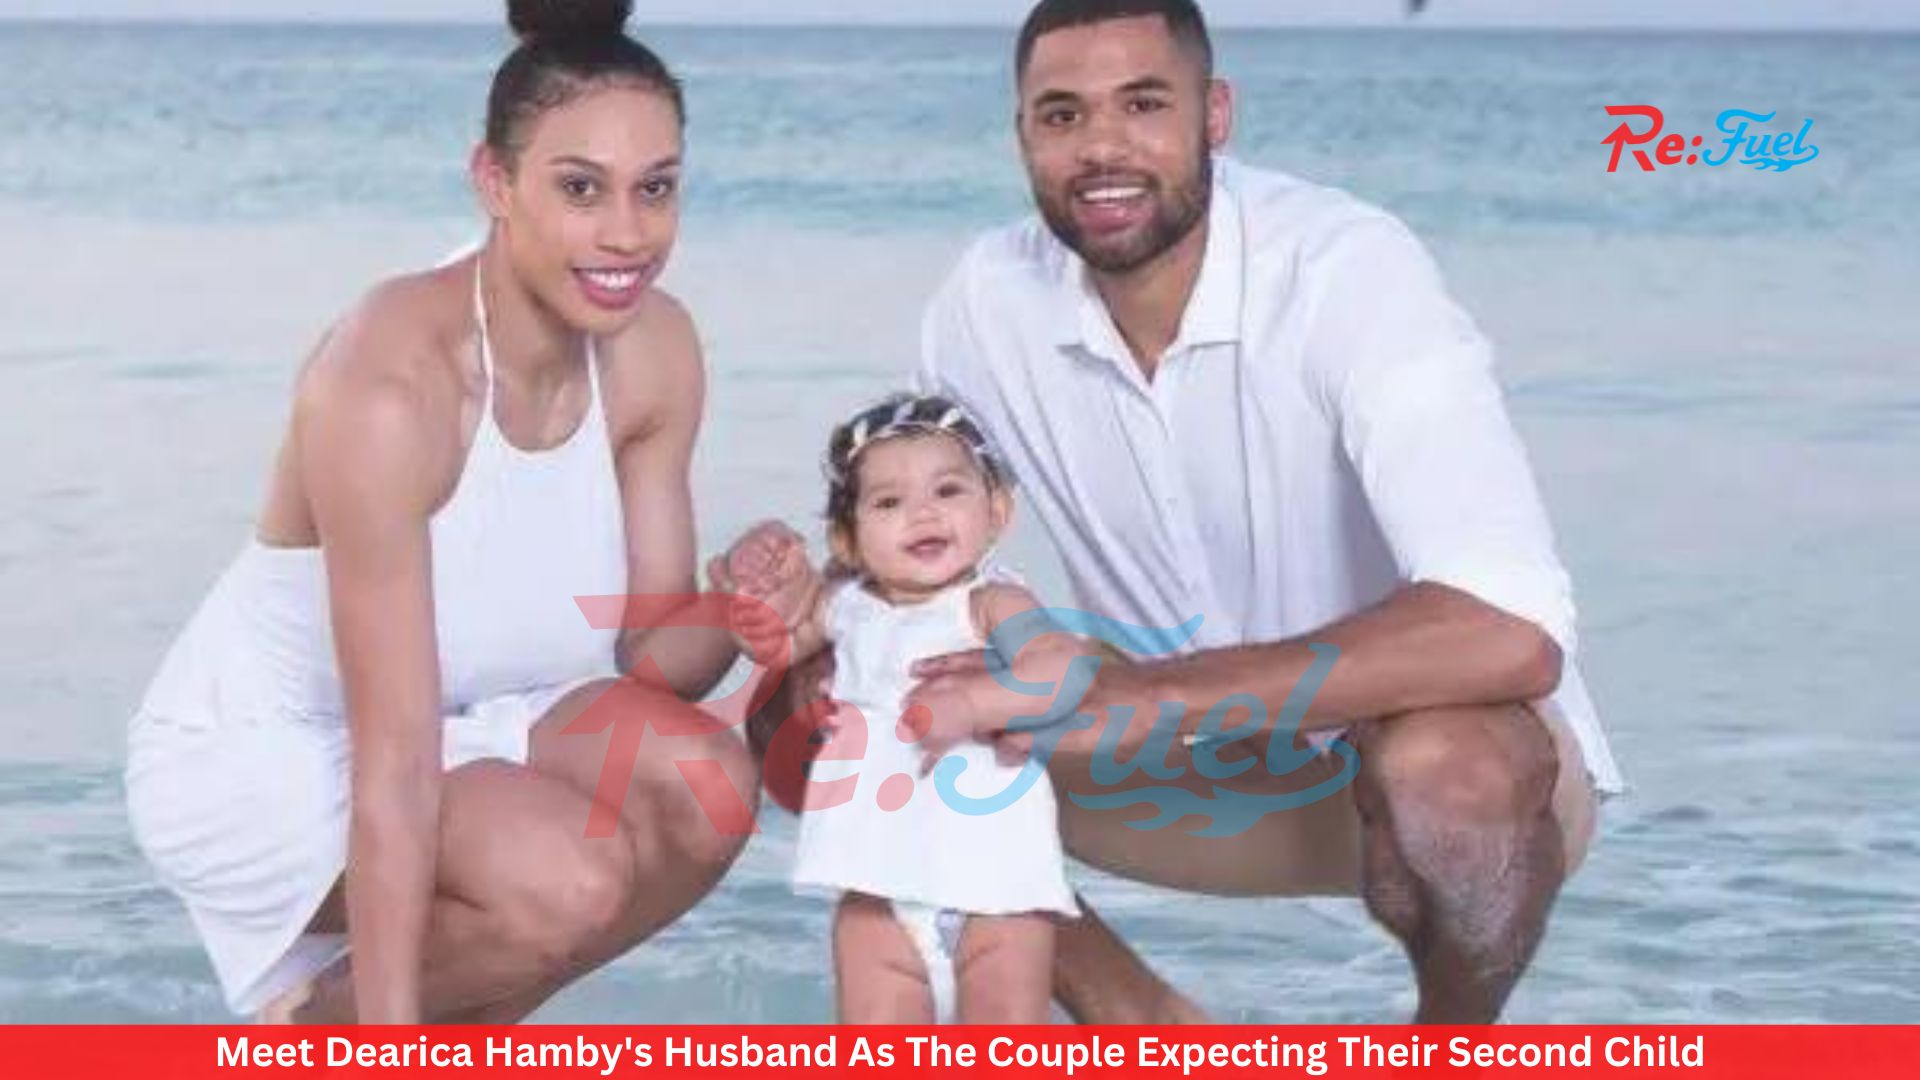 Meet Dearica Hamby's Husband As The Couple Expecting Their Second Child